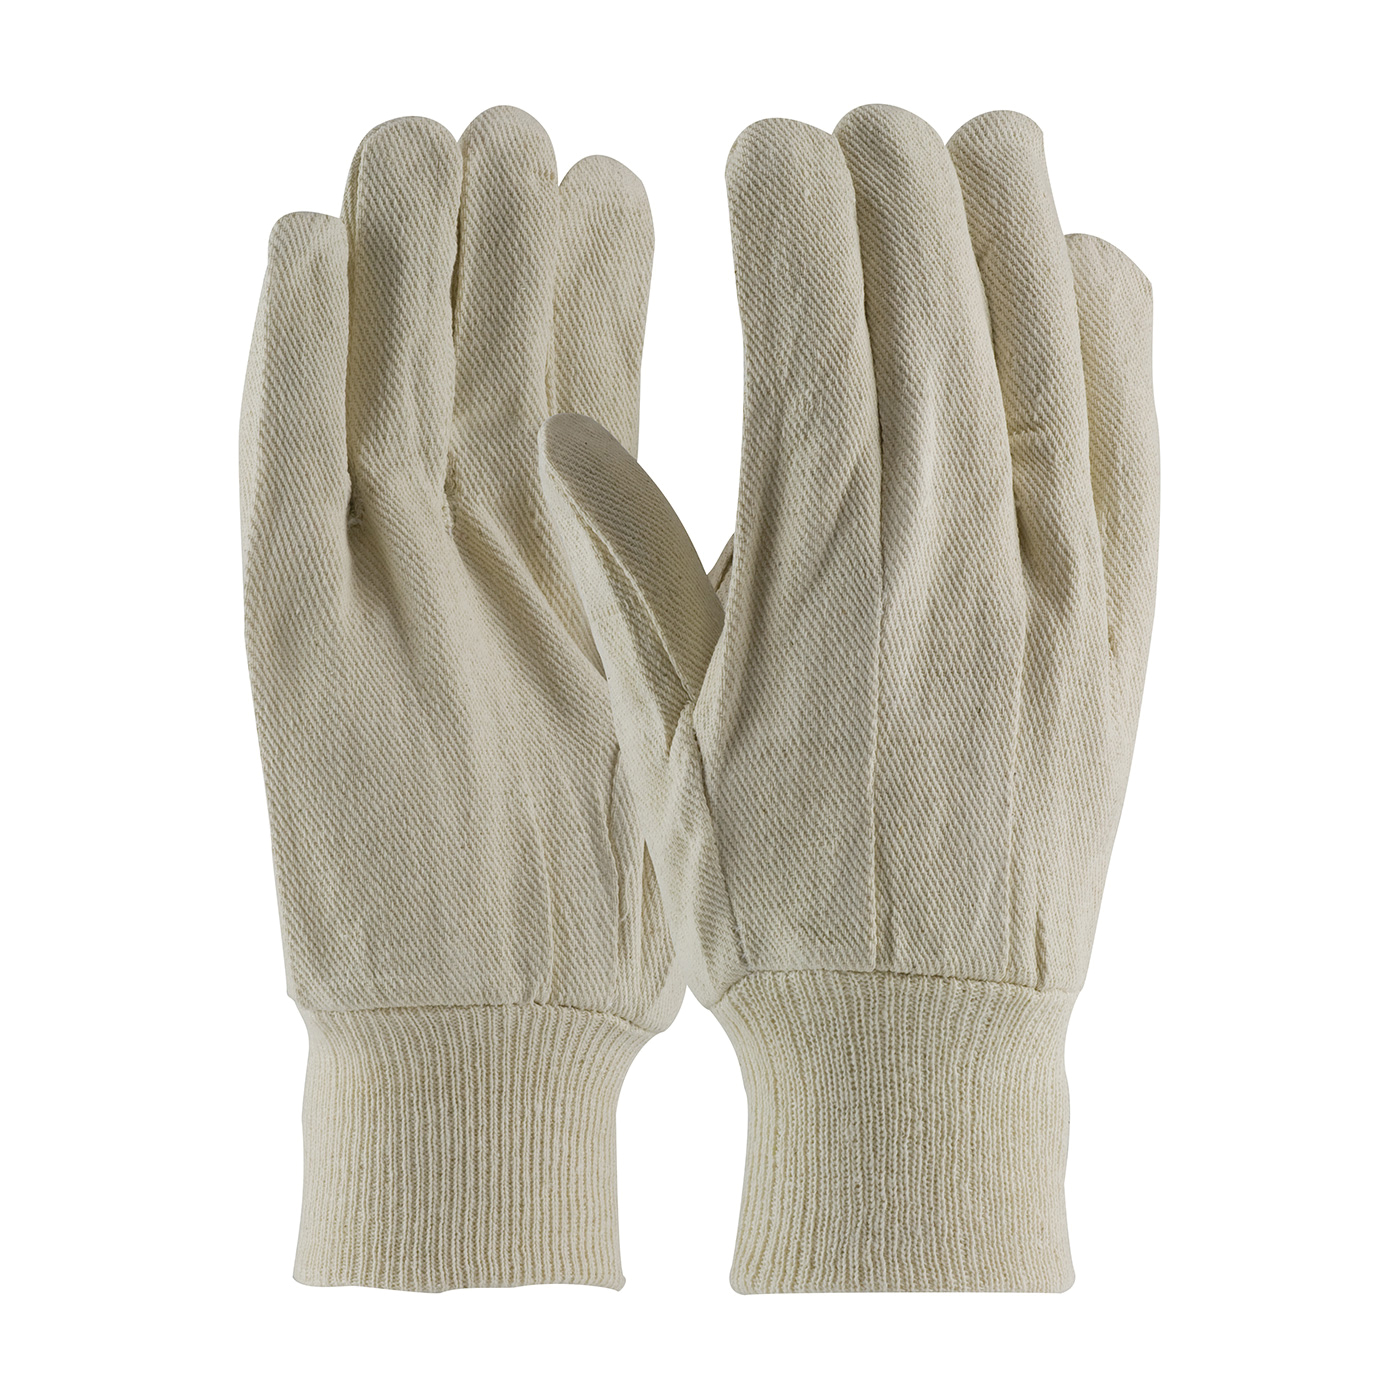 PIP® 90-908I Economy Grade Men's Single Palm General Purpose Gloves, Fabric/Work, Clute Cut/Full Finger/Straight Thumb Style, Cotton Palm, Cotton, Natural, Knit Wrist Cuff, Uncoated Coating, Canvas Lining